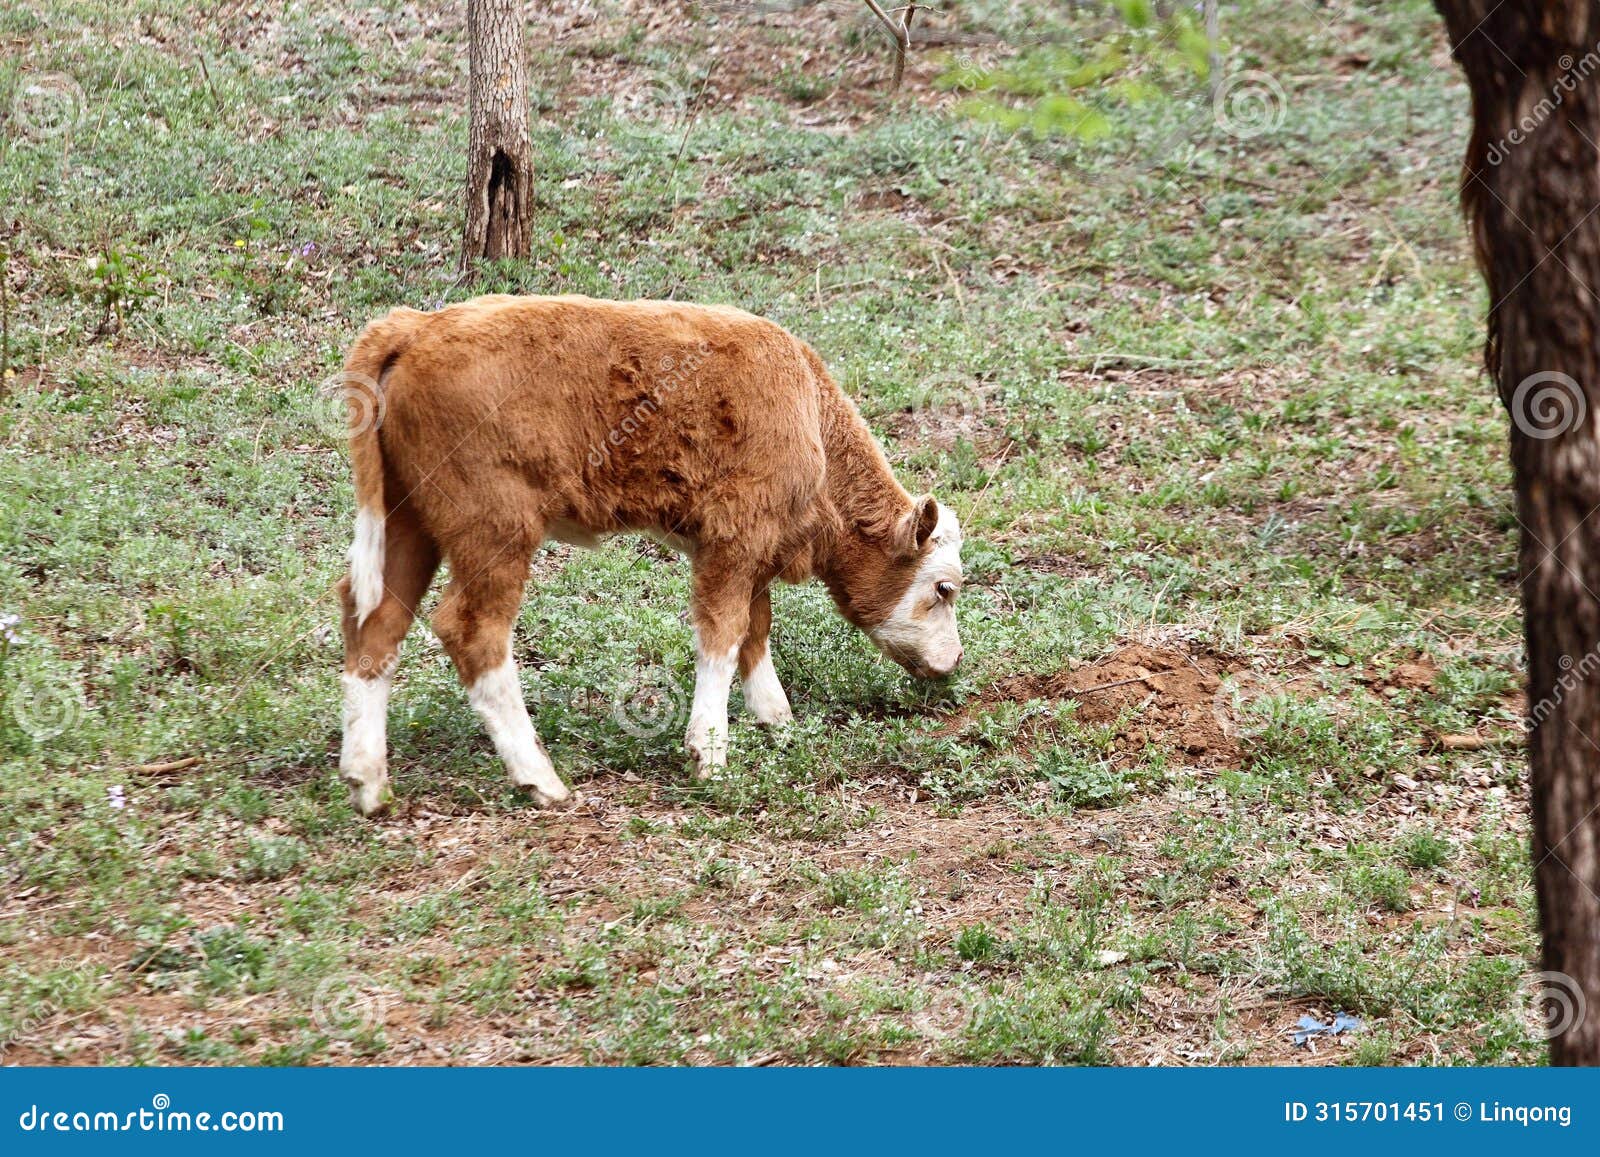 a calf is grazing on the grass..